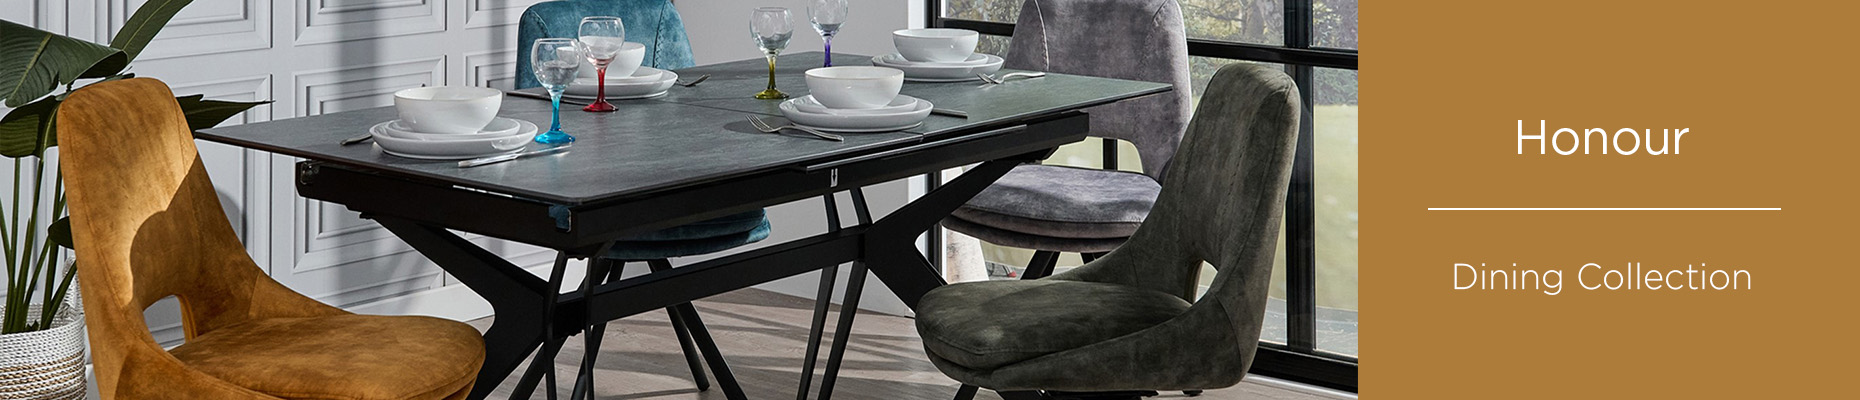 Honour Dining collection at Forrest Furnishing